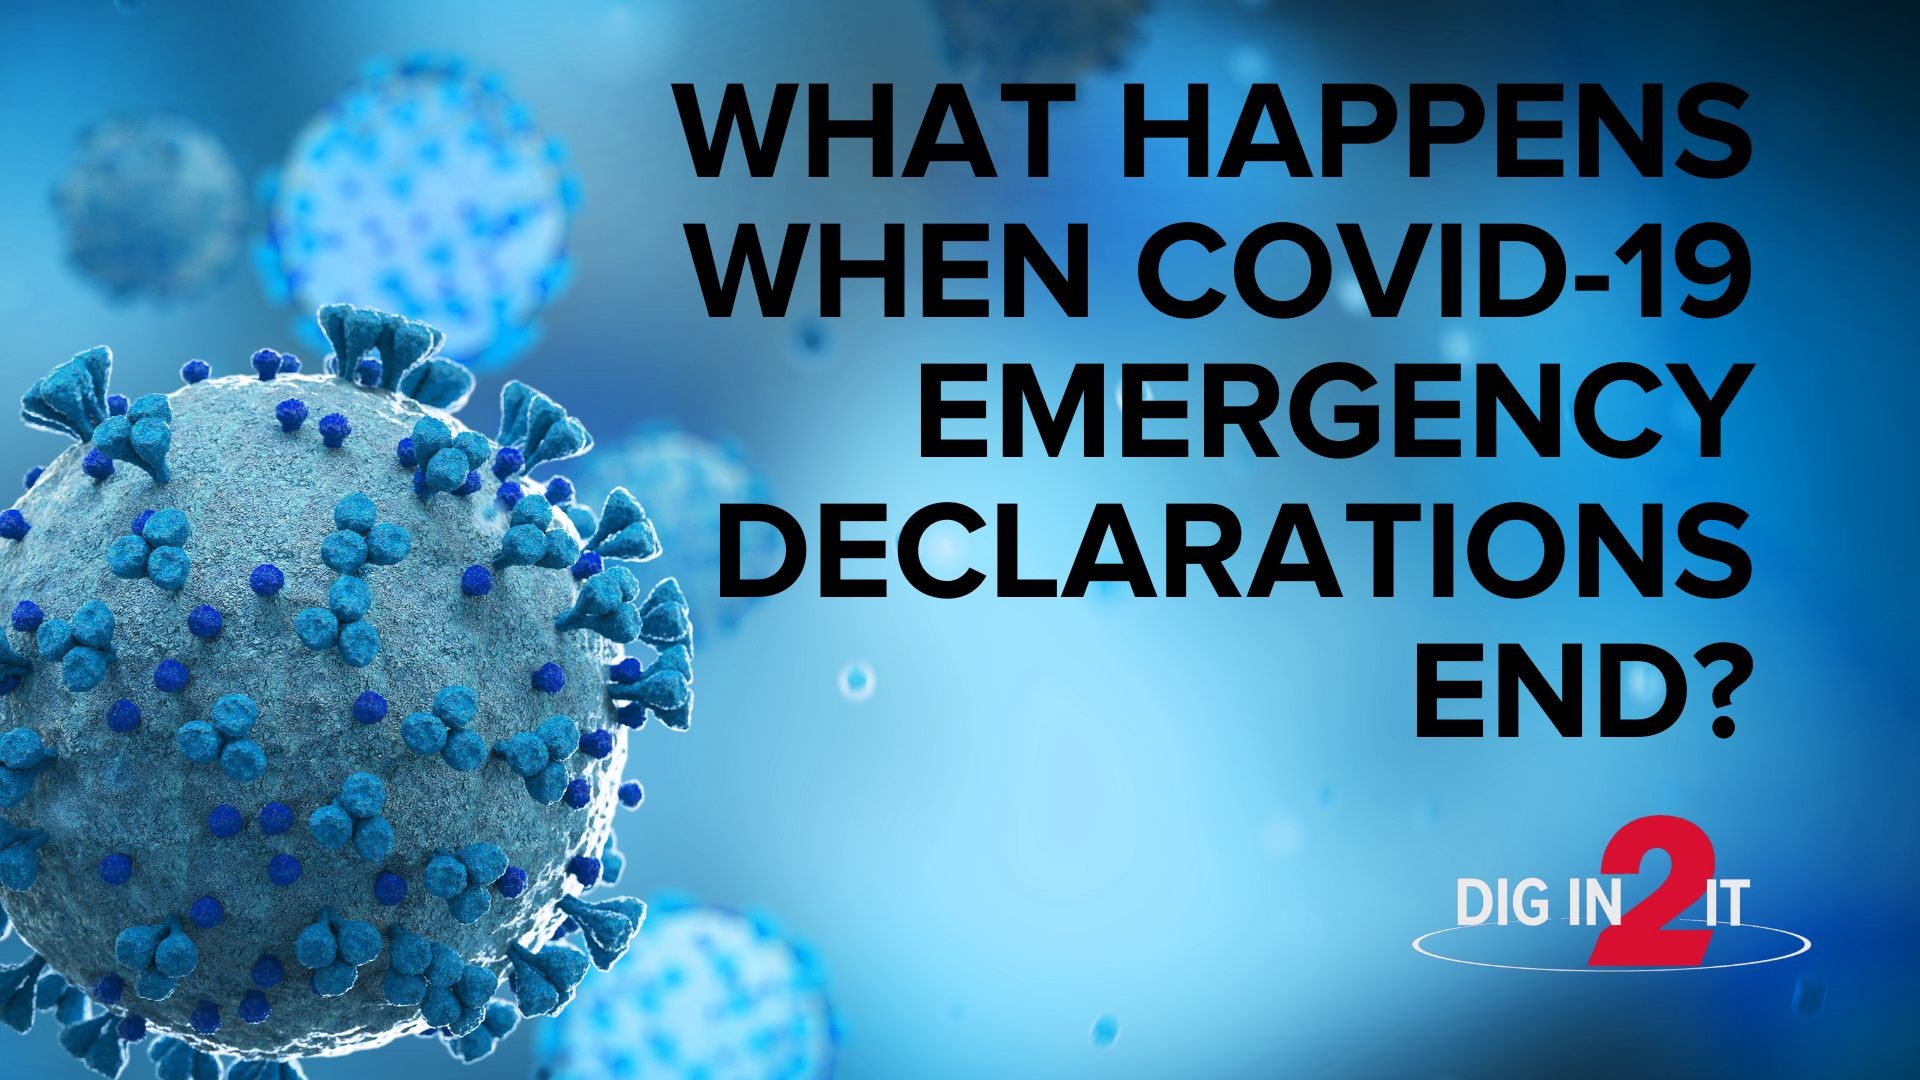 When the federal emergency declarations end, you could see changes to who pays for COVID-19 testing and vaccines, Medicaid, student loan repayment and more.